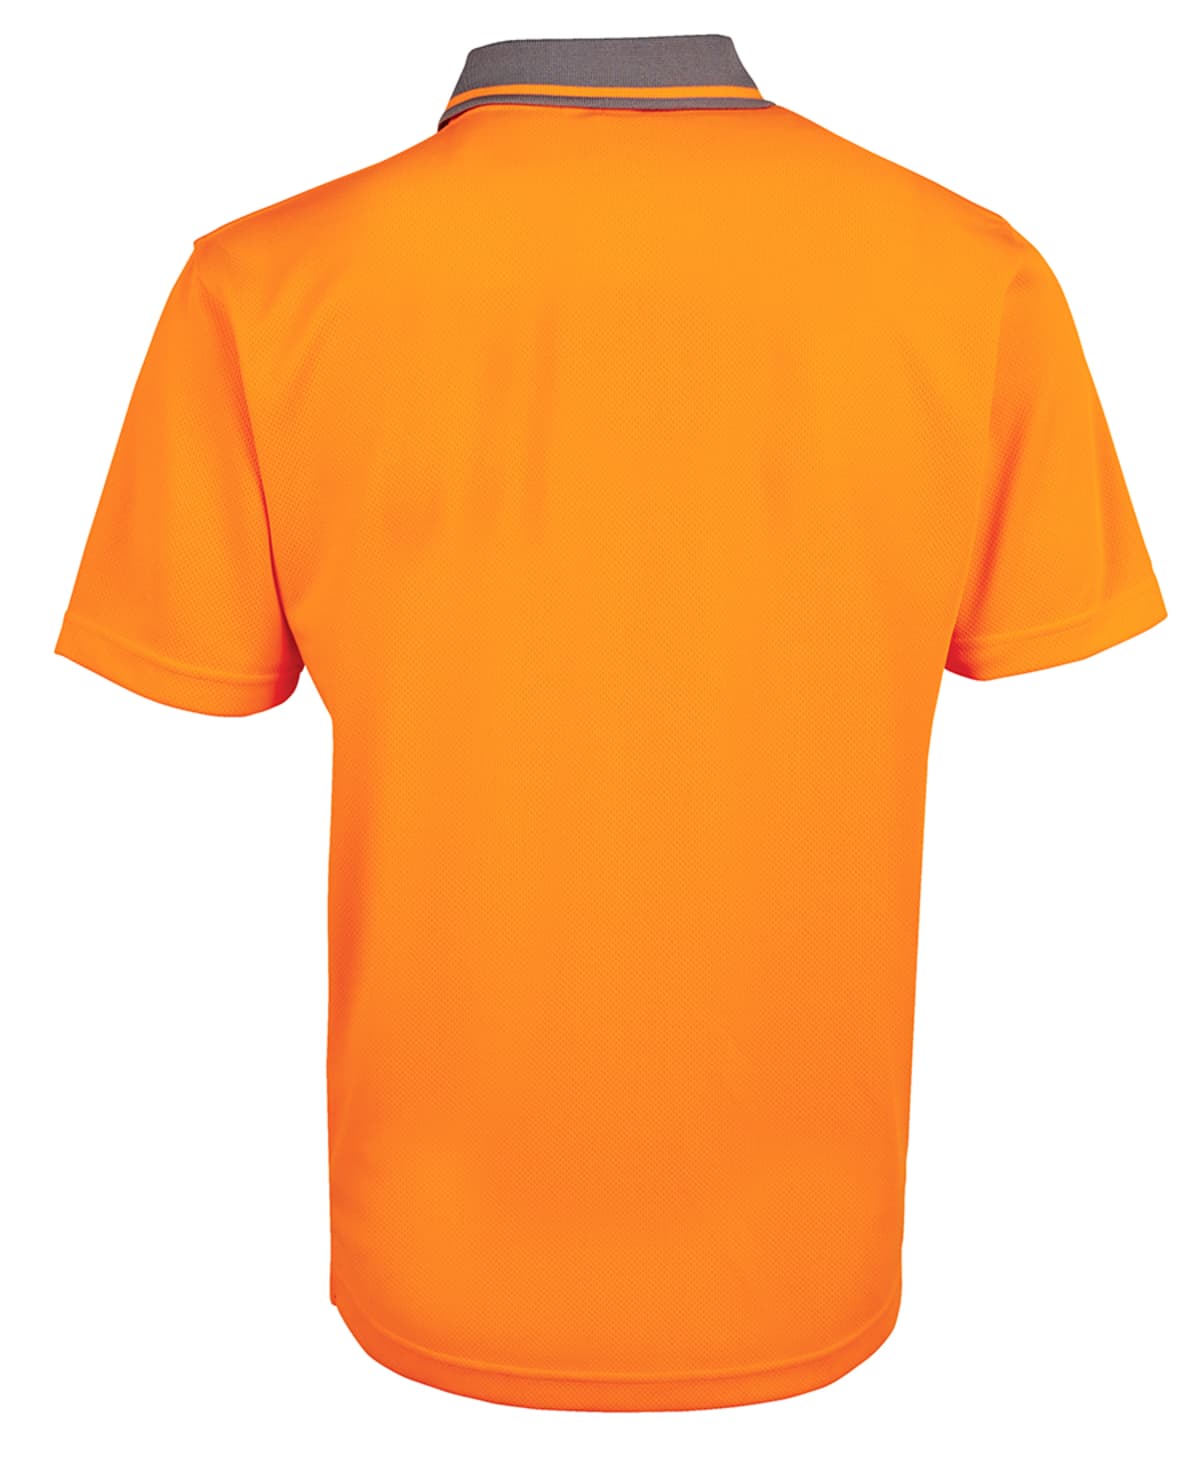 JB's Adults and Kids Hi Vis Non Cuff Traditional Polo